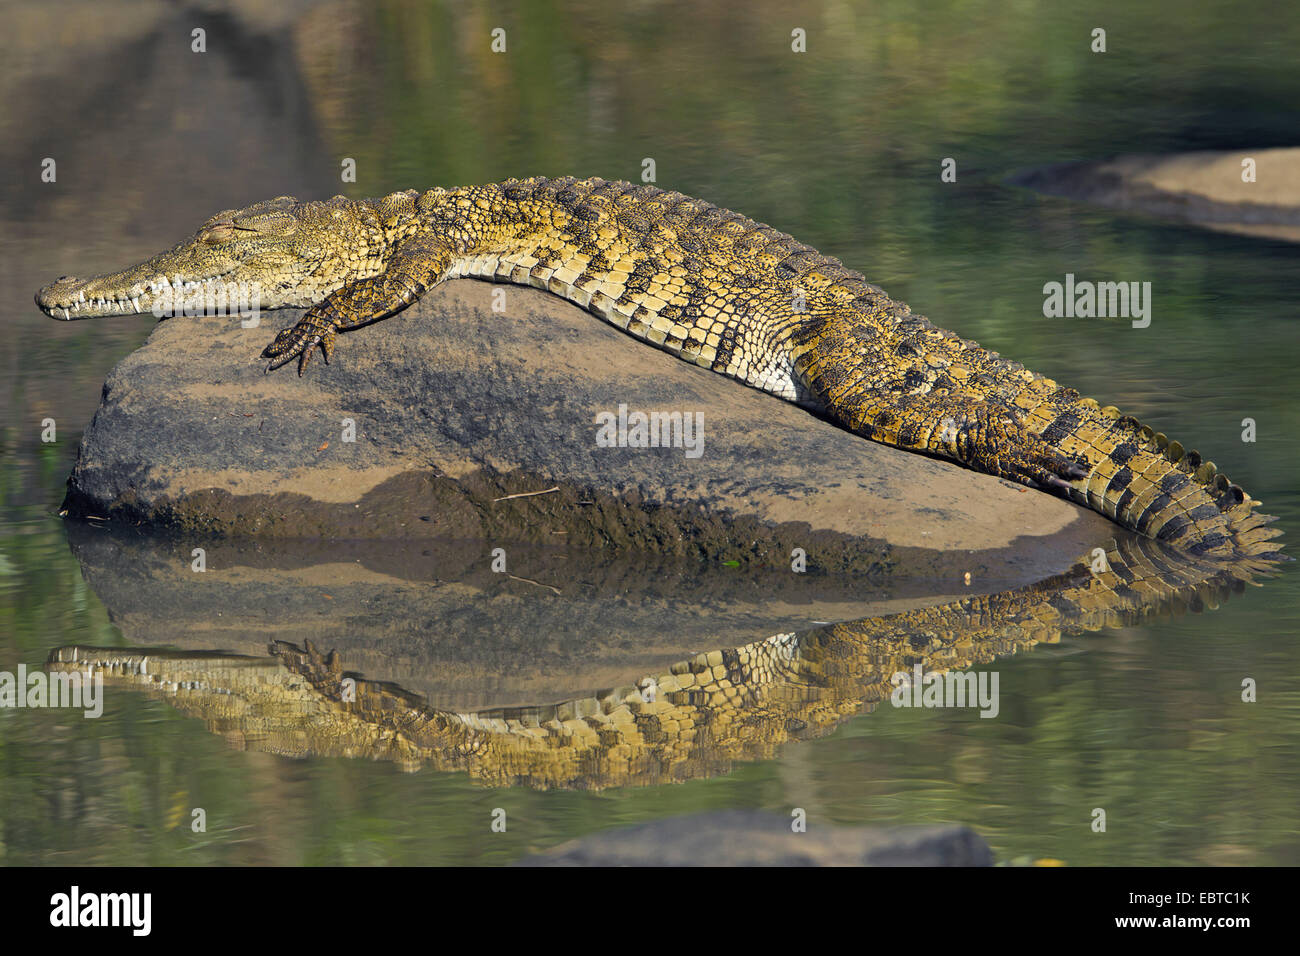 Nile crocodile (Crocodylus niloticus), lying on a rock in water and sleeps, South Africa, Hluhluwe-Umfolozi National Park, Hilltop Camp Stock Photo